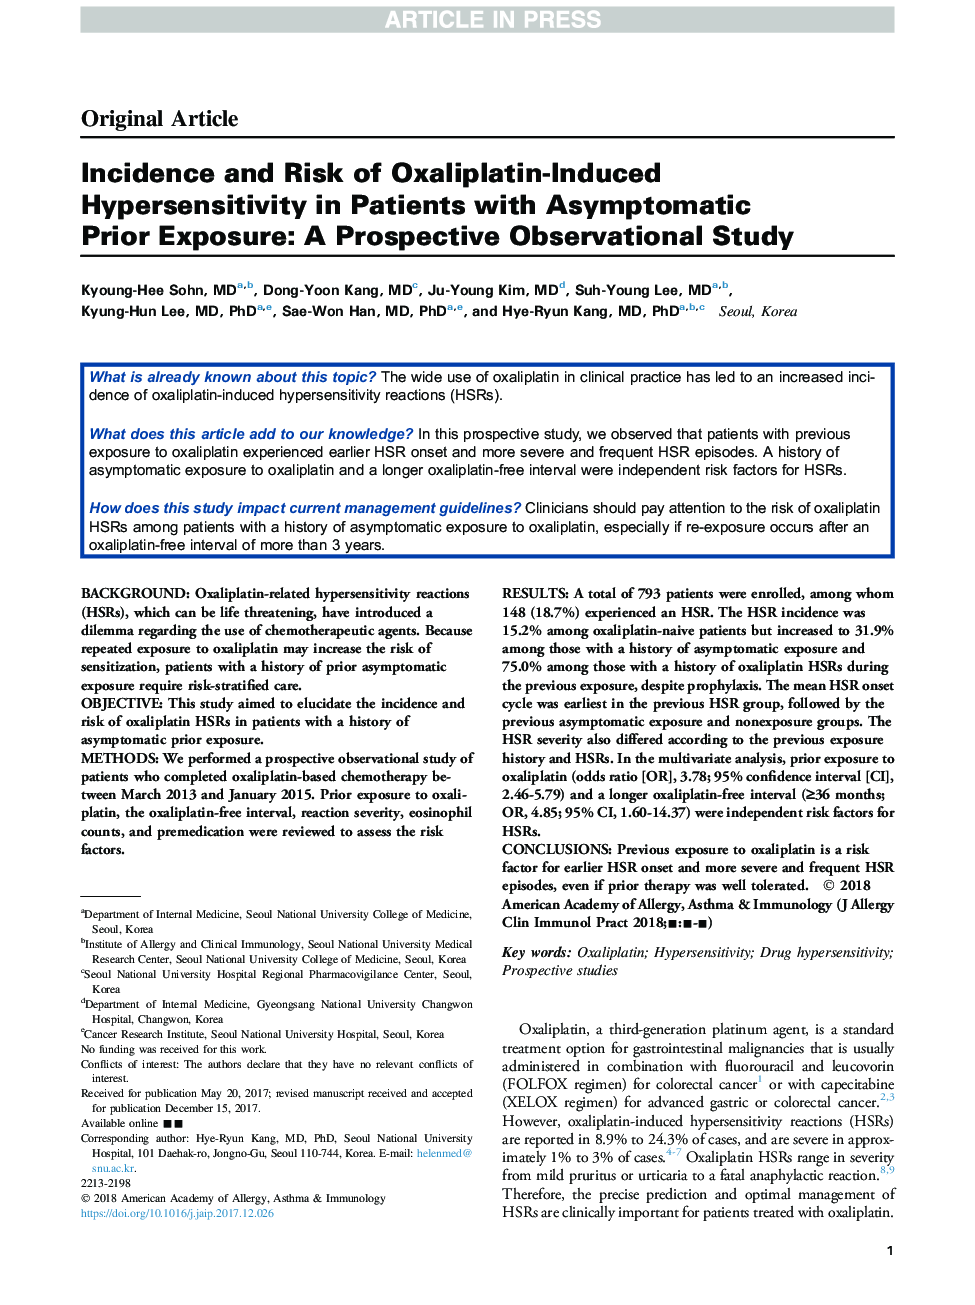 Incidence and Risk of Oxaliplatin-Induced Hypersensitivity in Patients with Asymptomatic Prior Exposure: A Prospective Observational Study